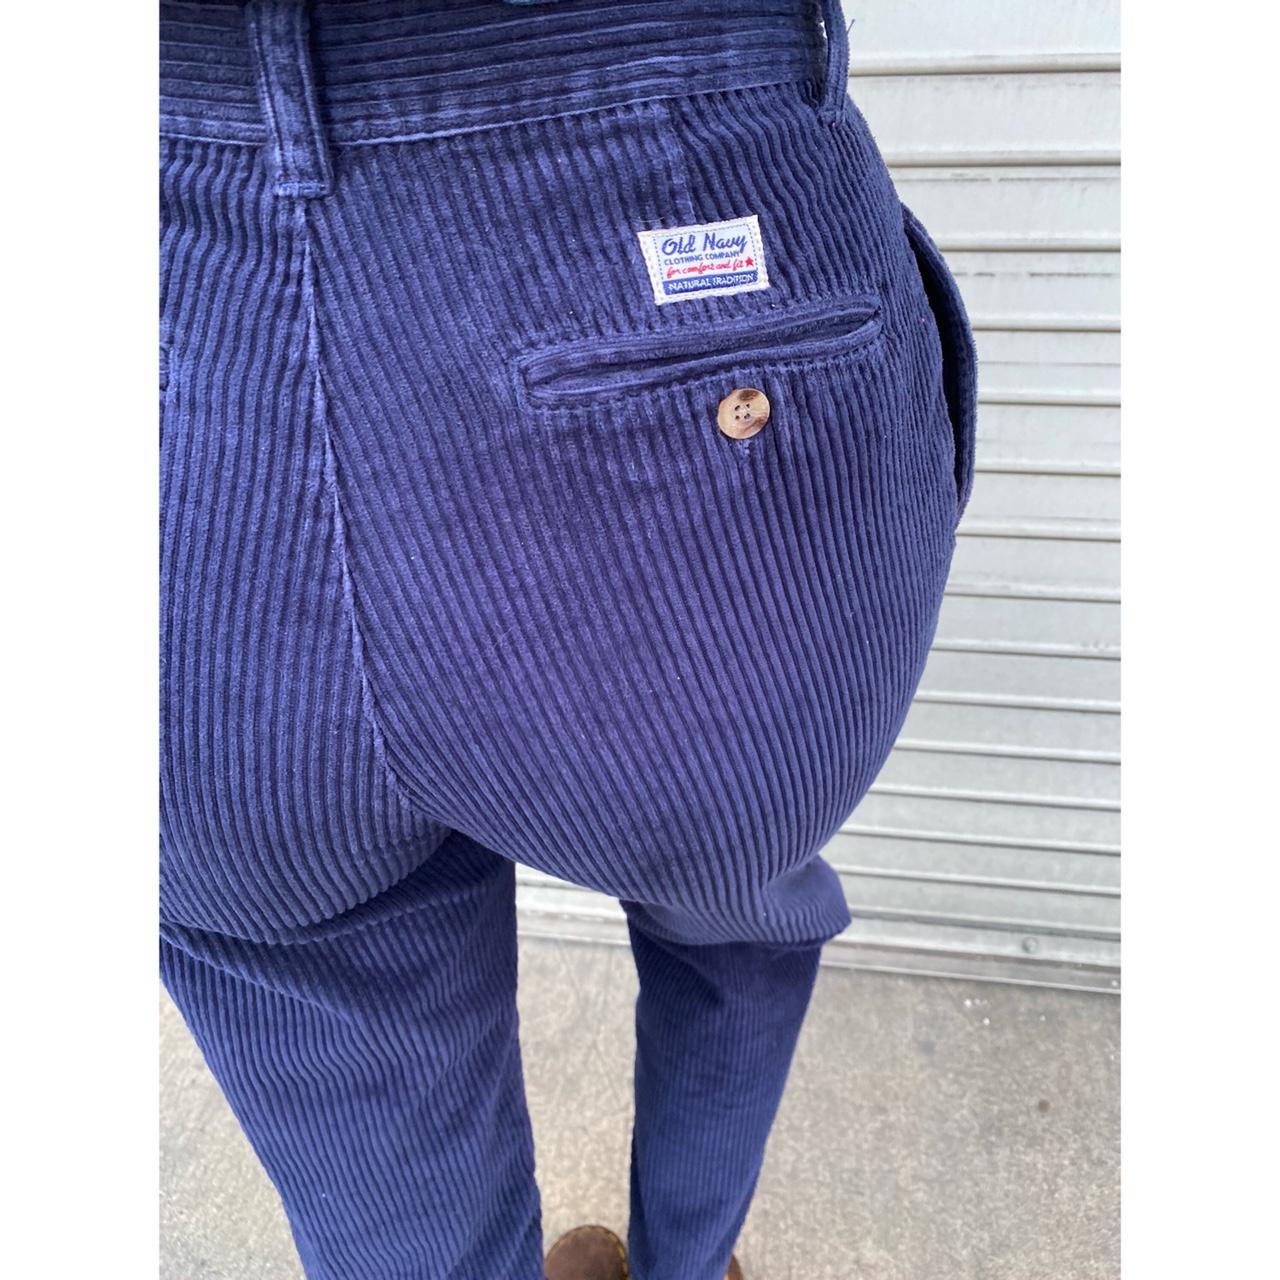 Old Navy thick corduroy vintage late 90s early 00’s... - Depop